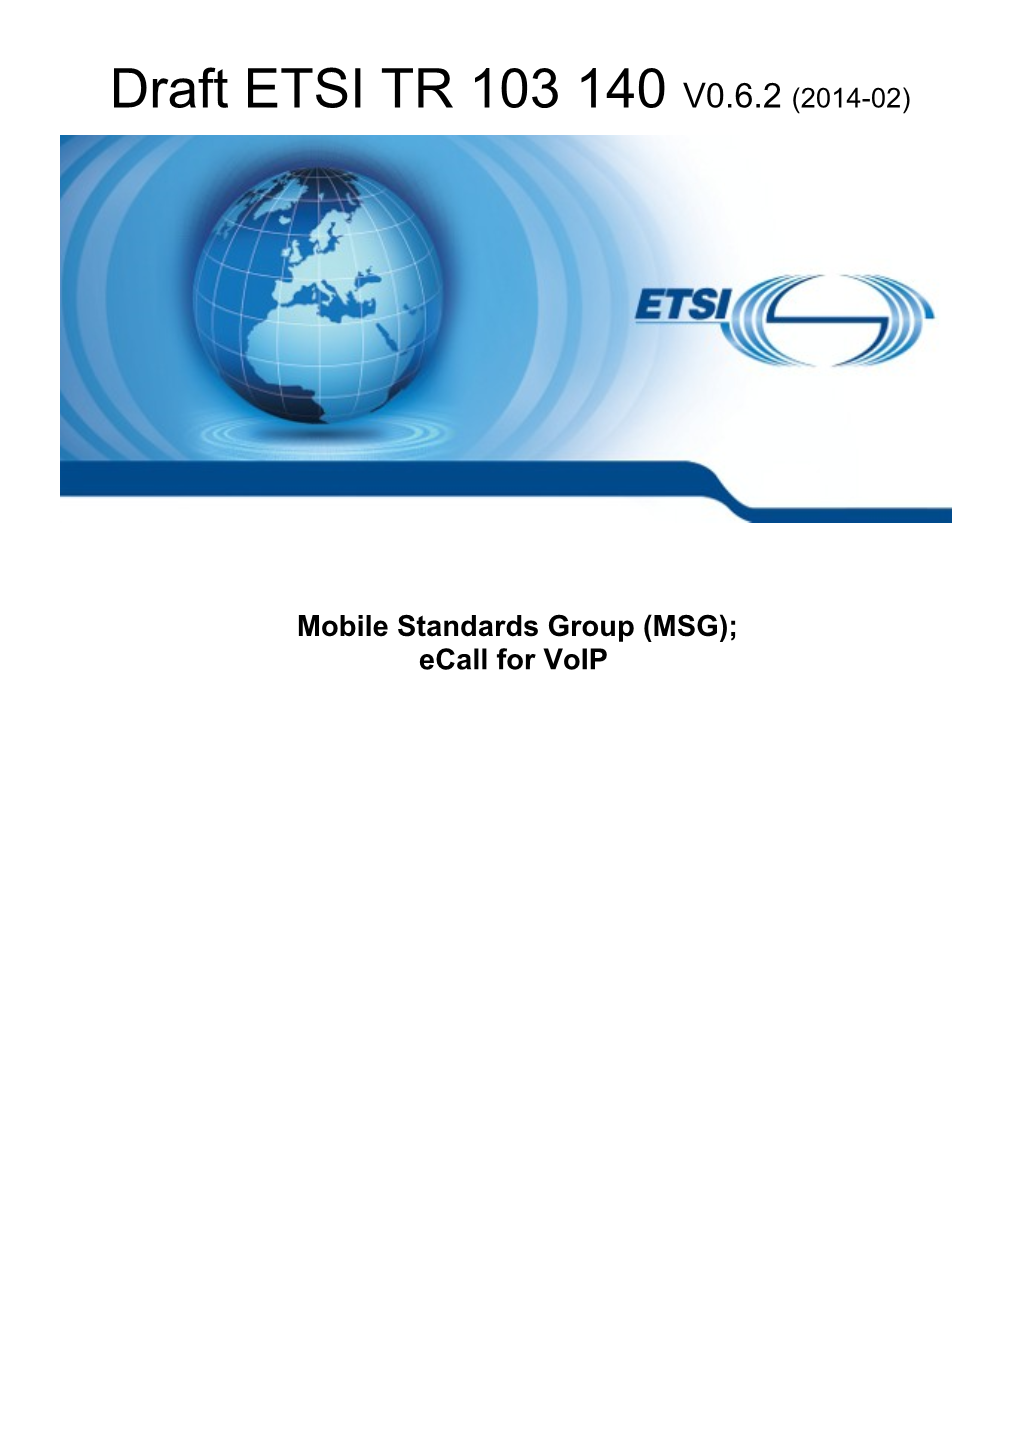 Mobile Standards Group (MSG);